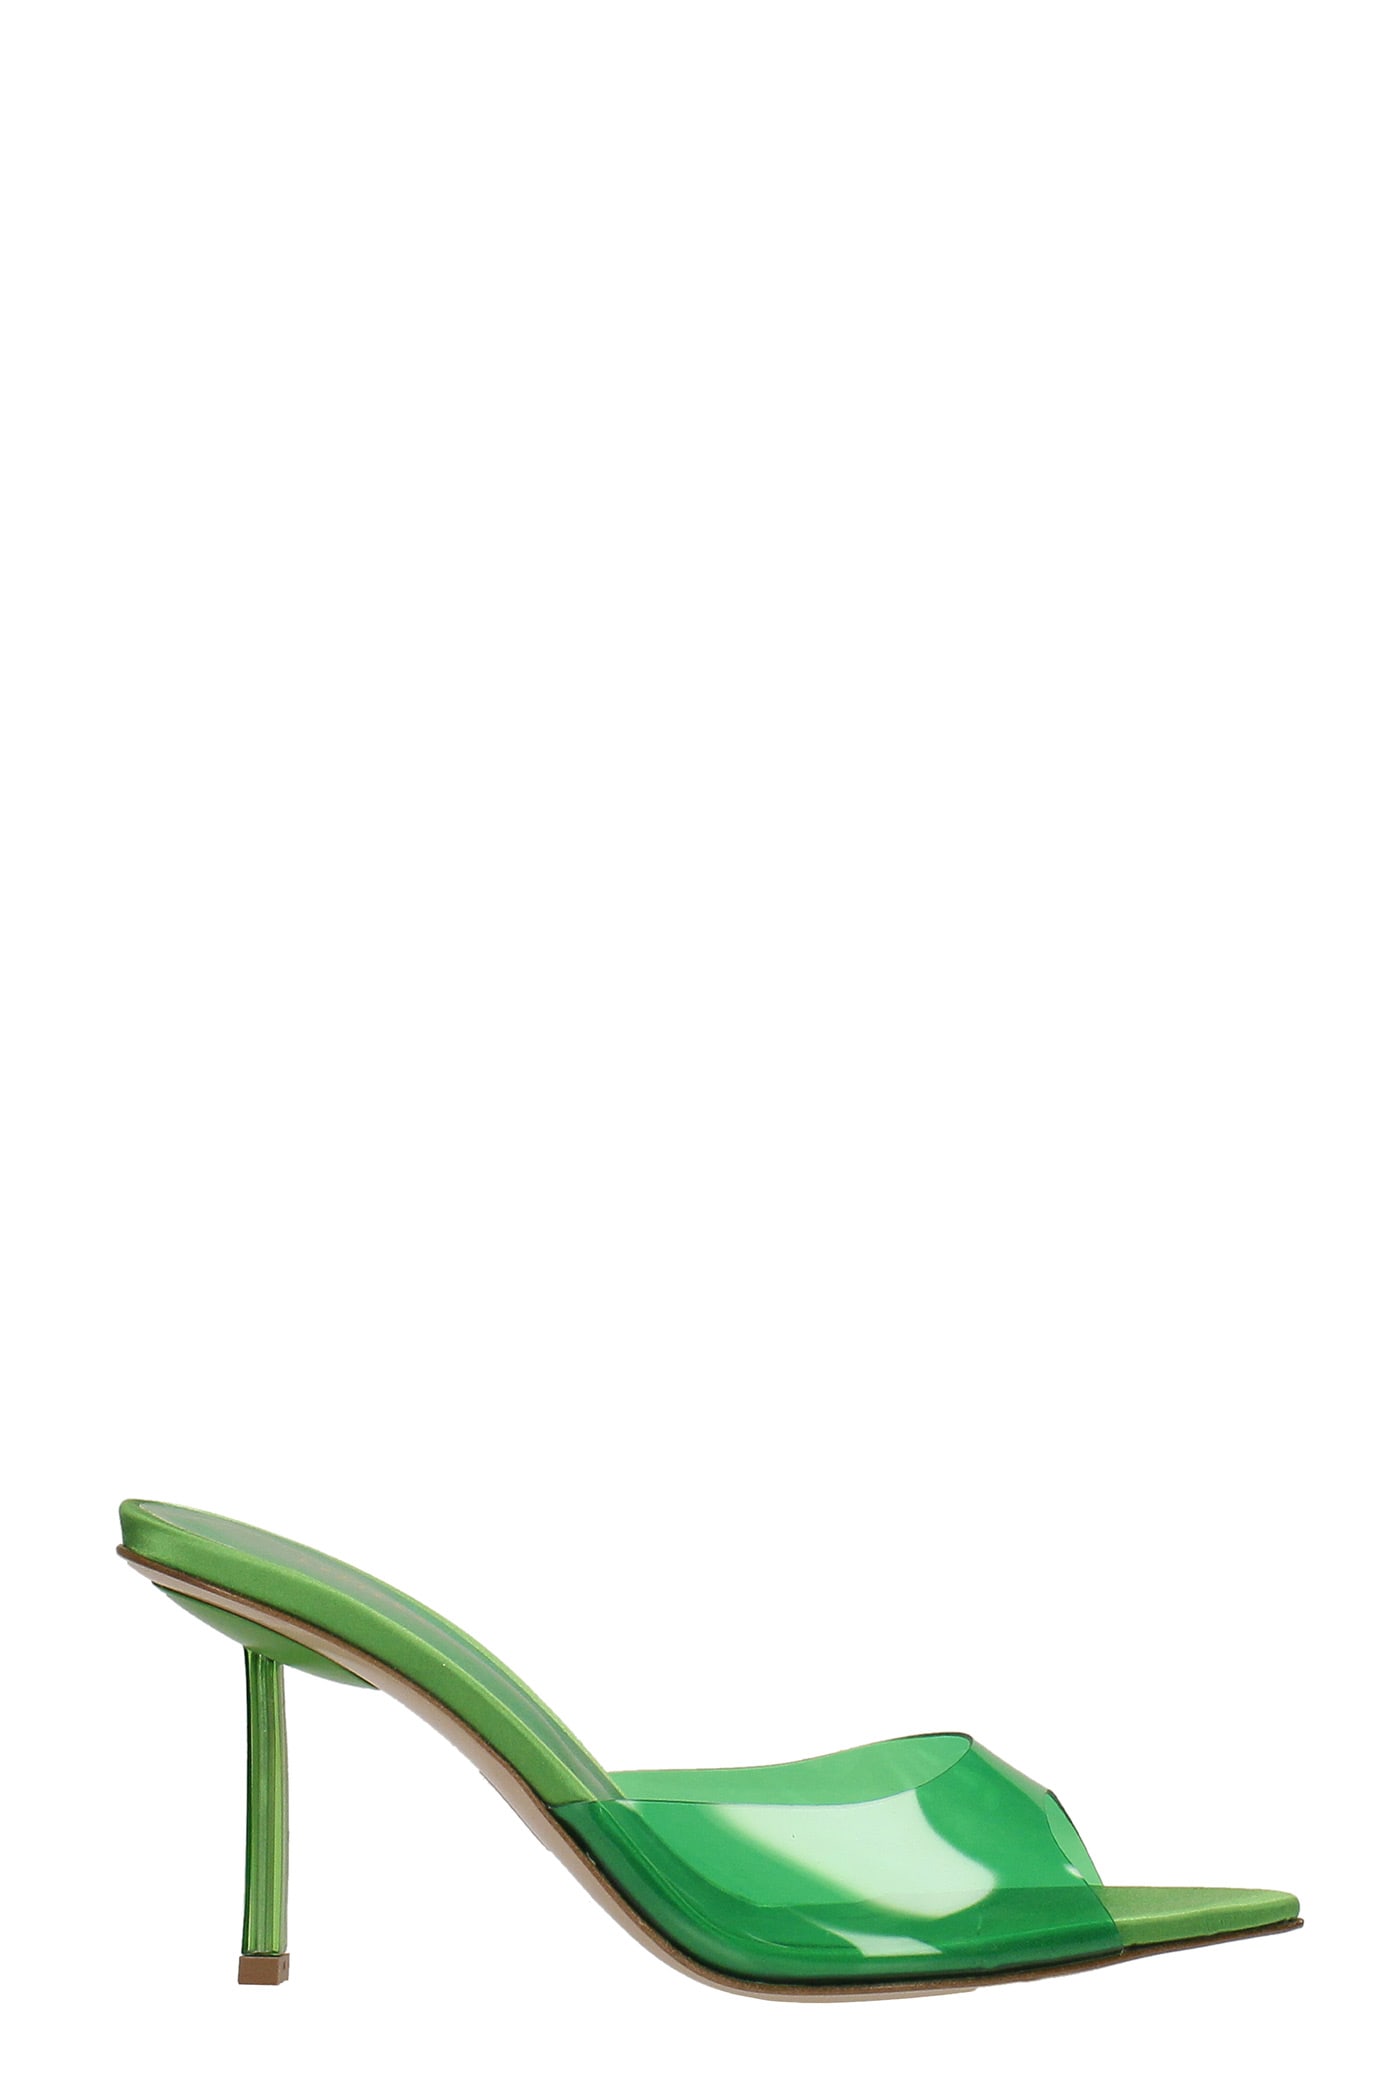 Le Silla Afrodite Sandals In Green Leather